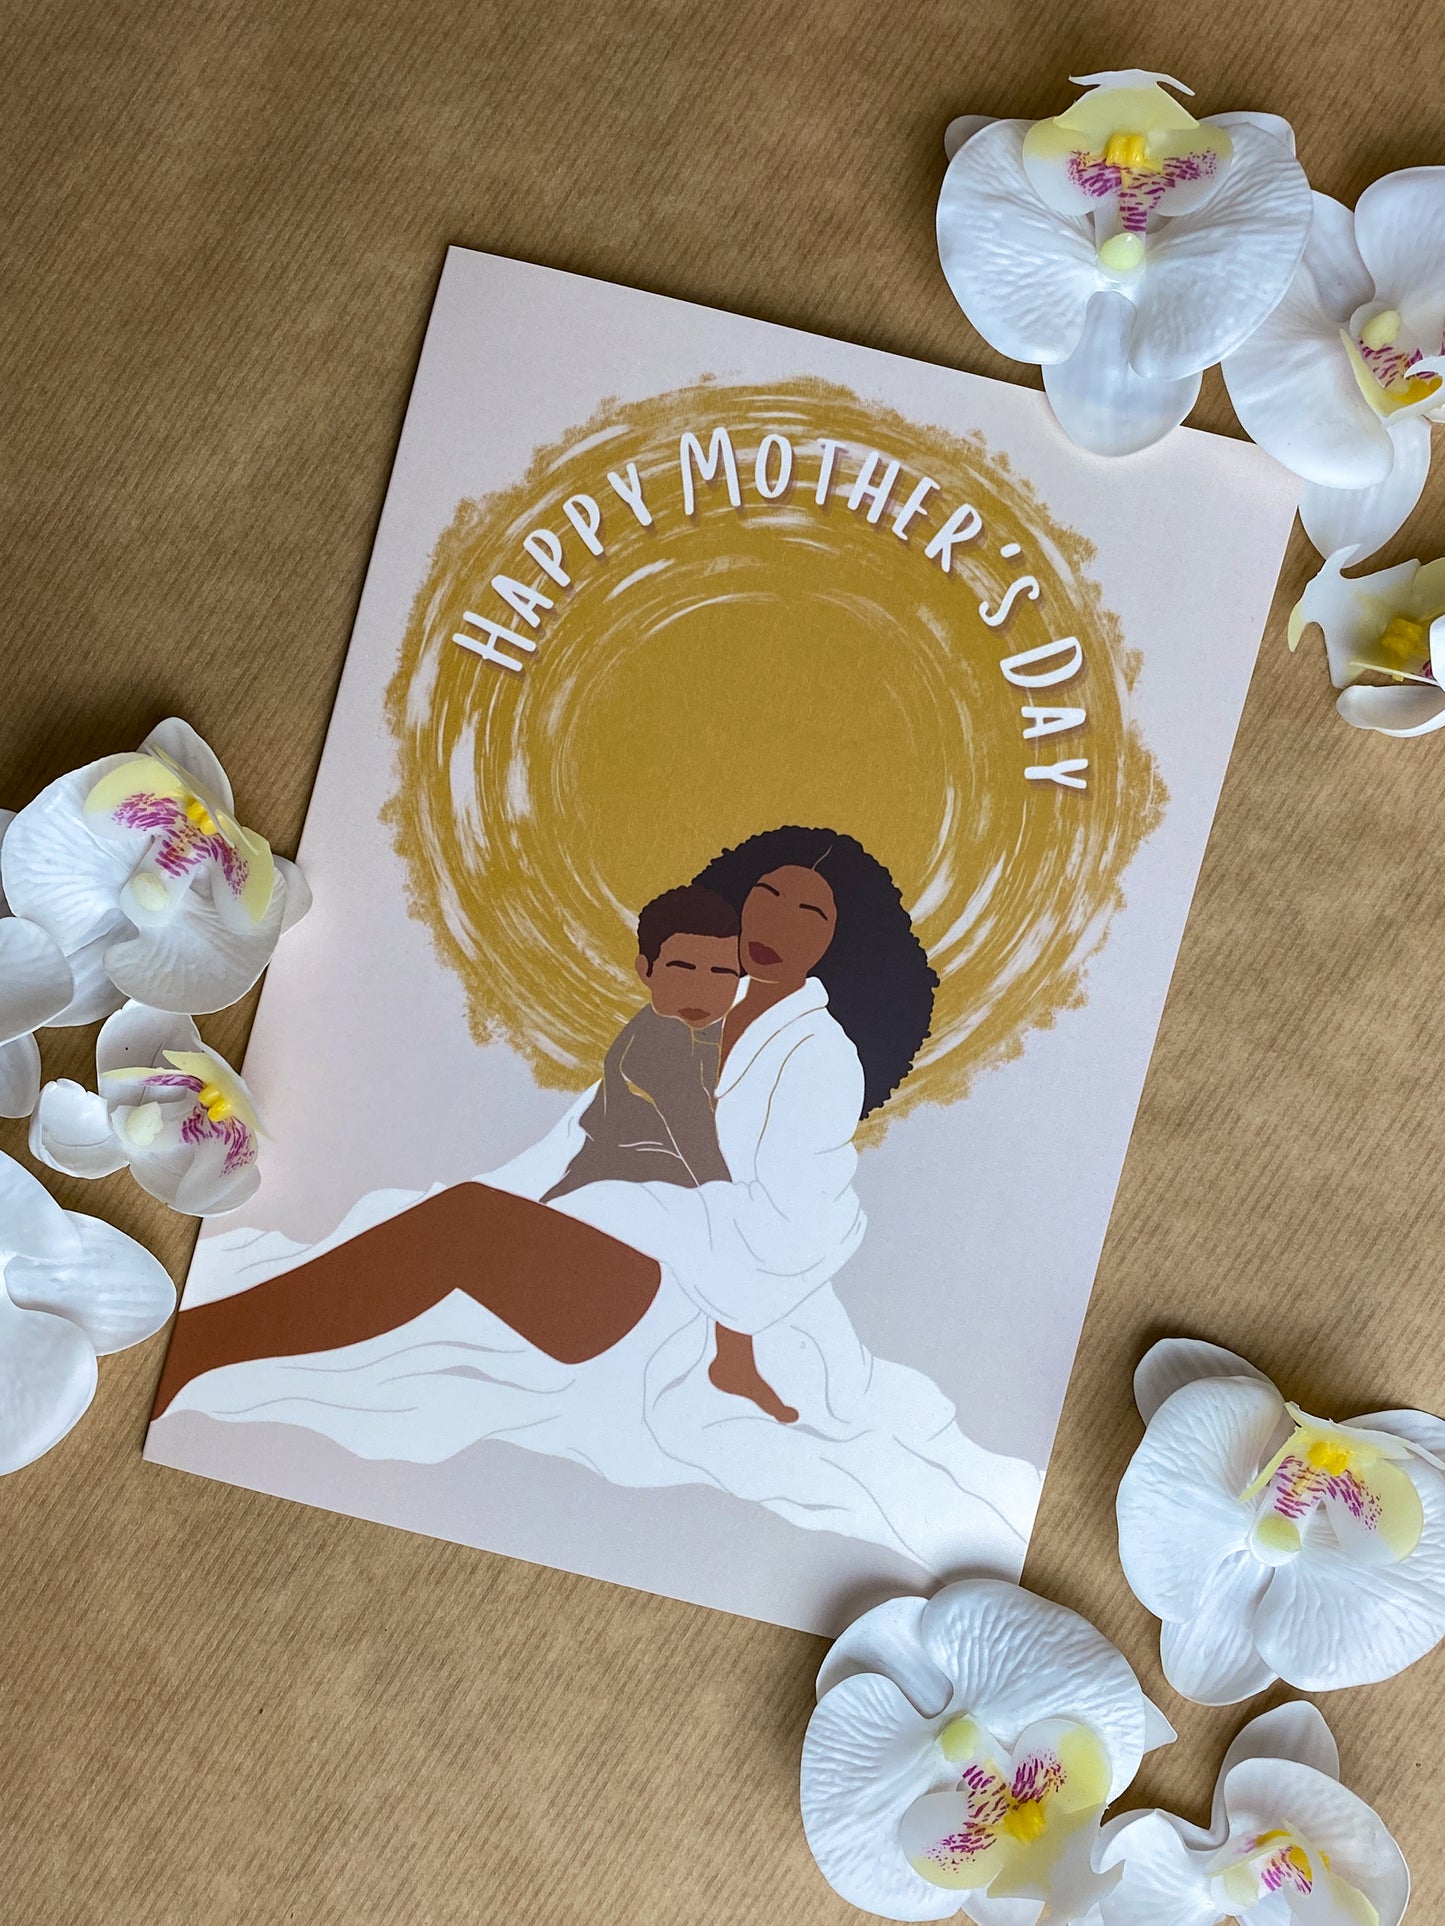 Mixed Race / Black - Boy Mum Mother & Child - Mother’s Day Card - Black Queen - Mom Mama Tiana